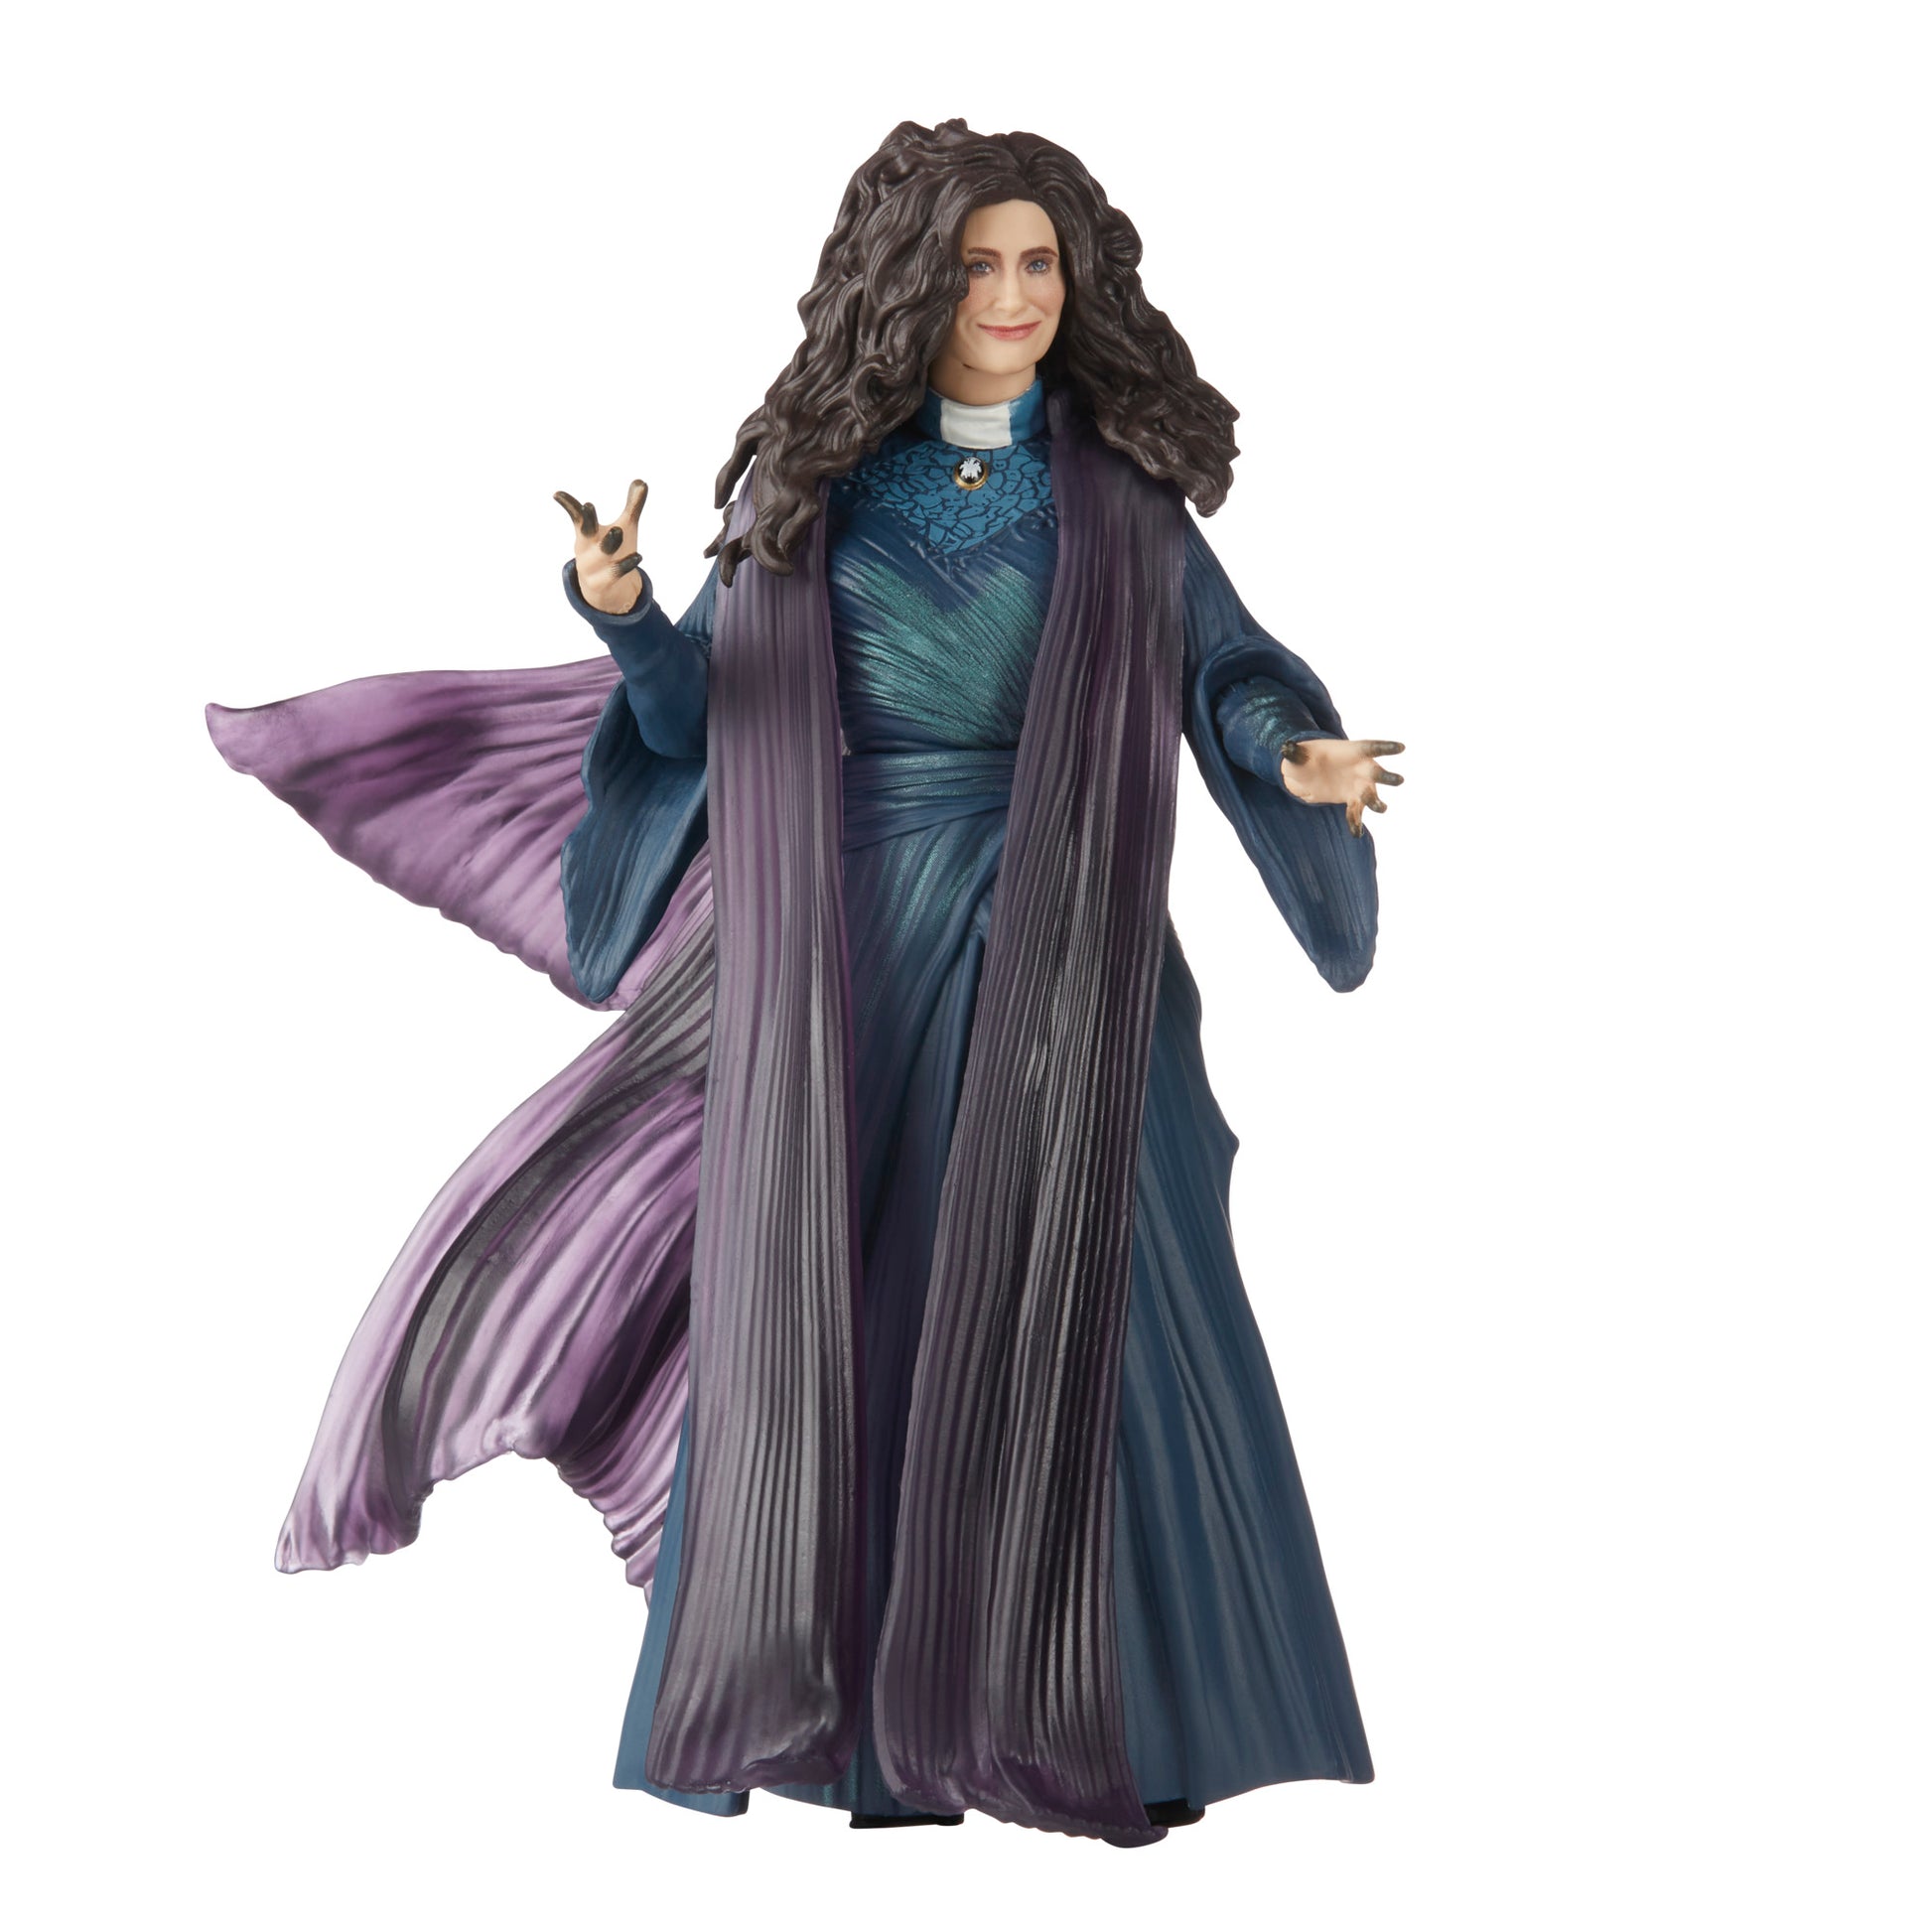 Agatha Harkness Action Figure 6-Inch Toy - Heretoserveyou